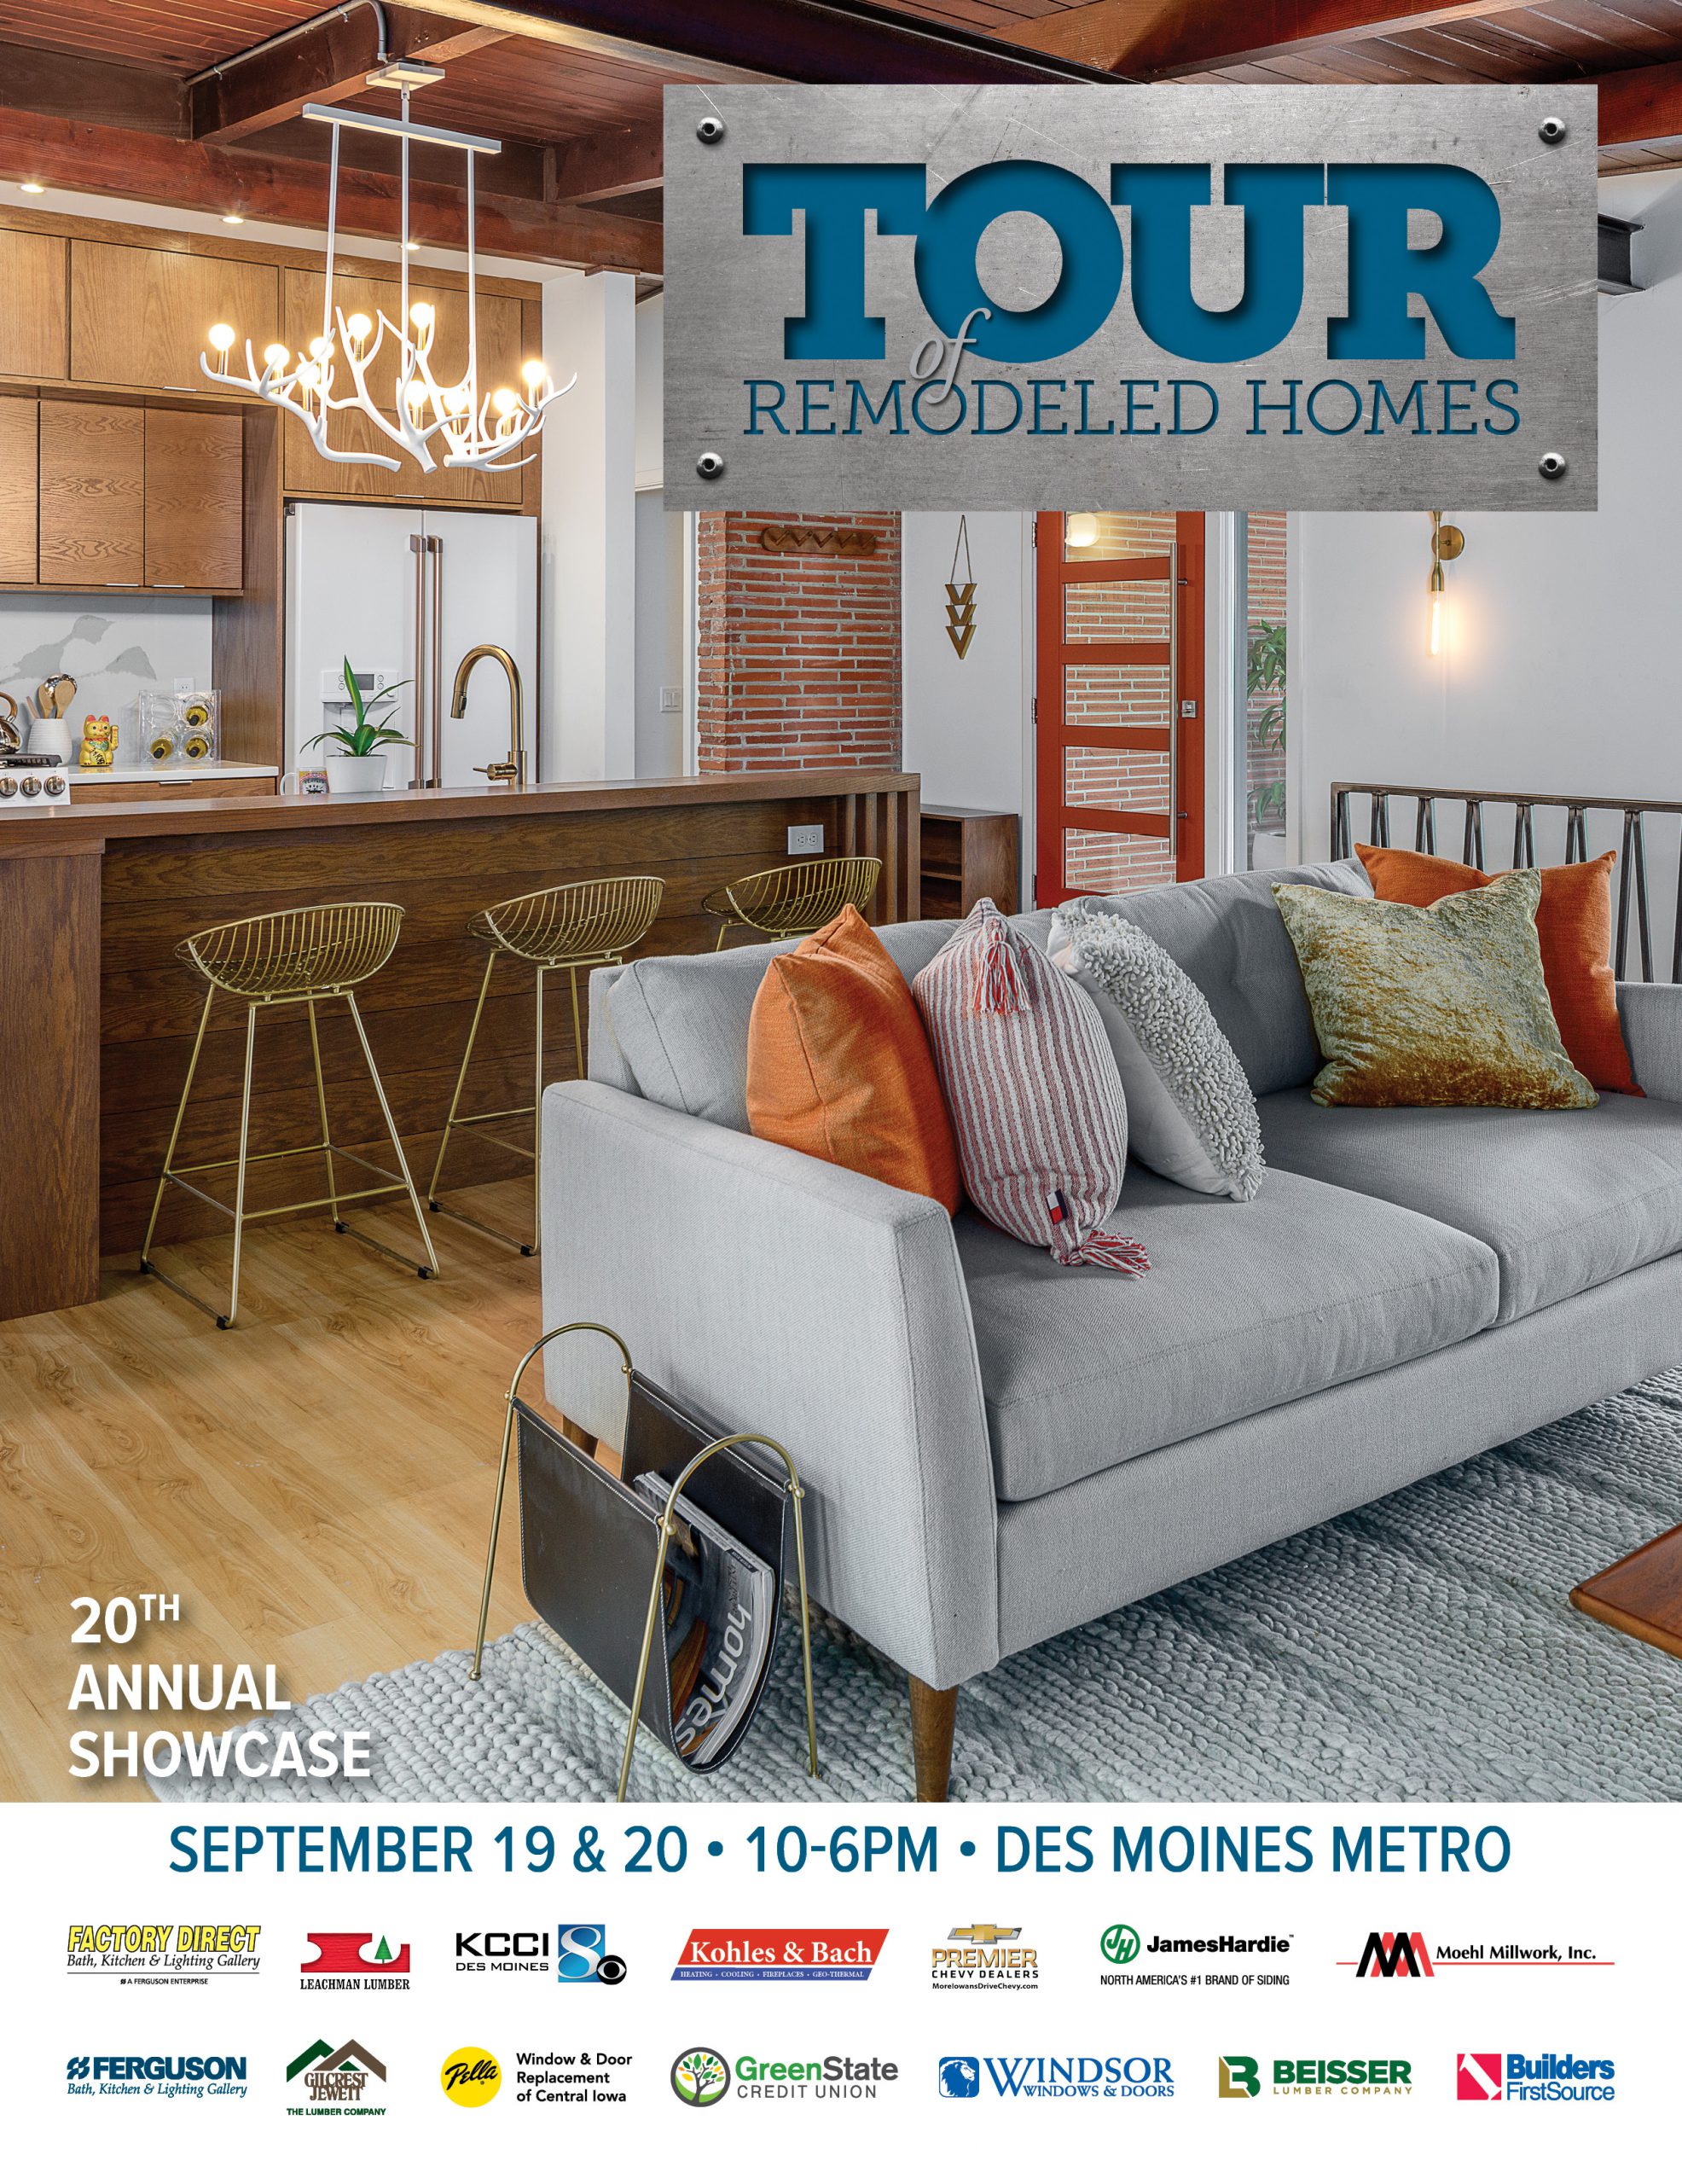 tour of remodeled homes des moines